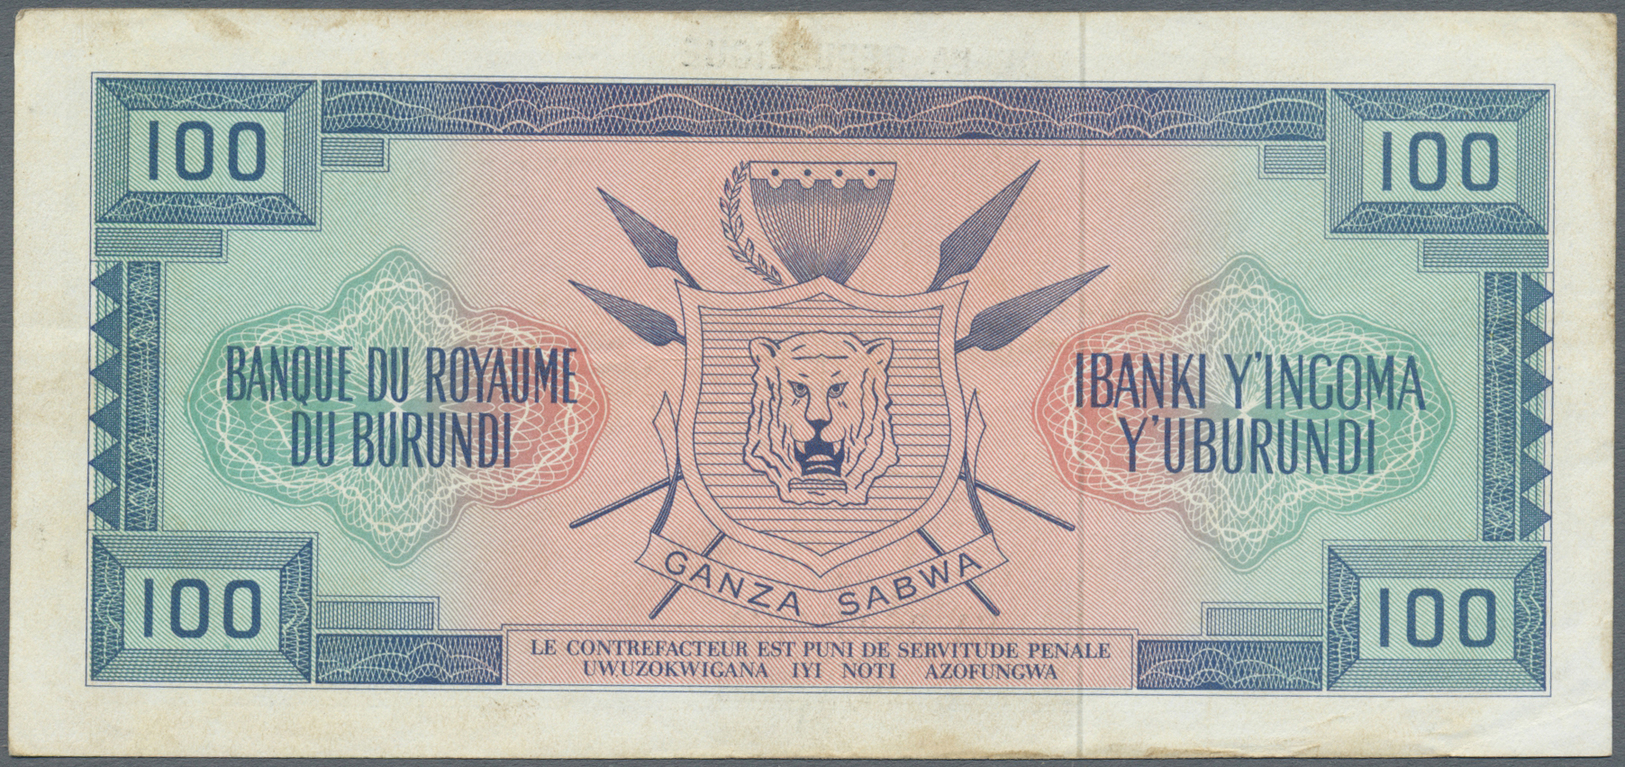 00447 Burundi: 100 Francs 1965 With Black Overprint P. 17a, Used With Center Fold, Light Stain In Paper, No Holes, Still - Burundi